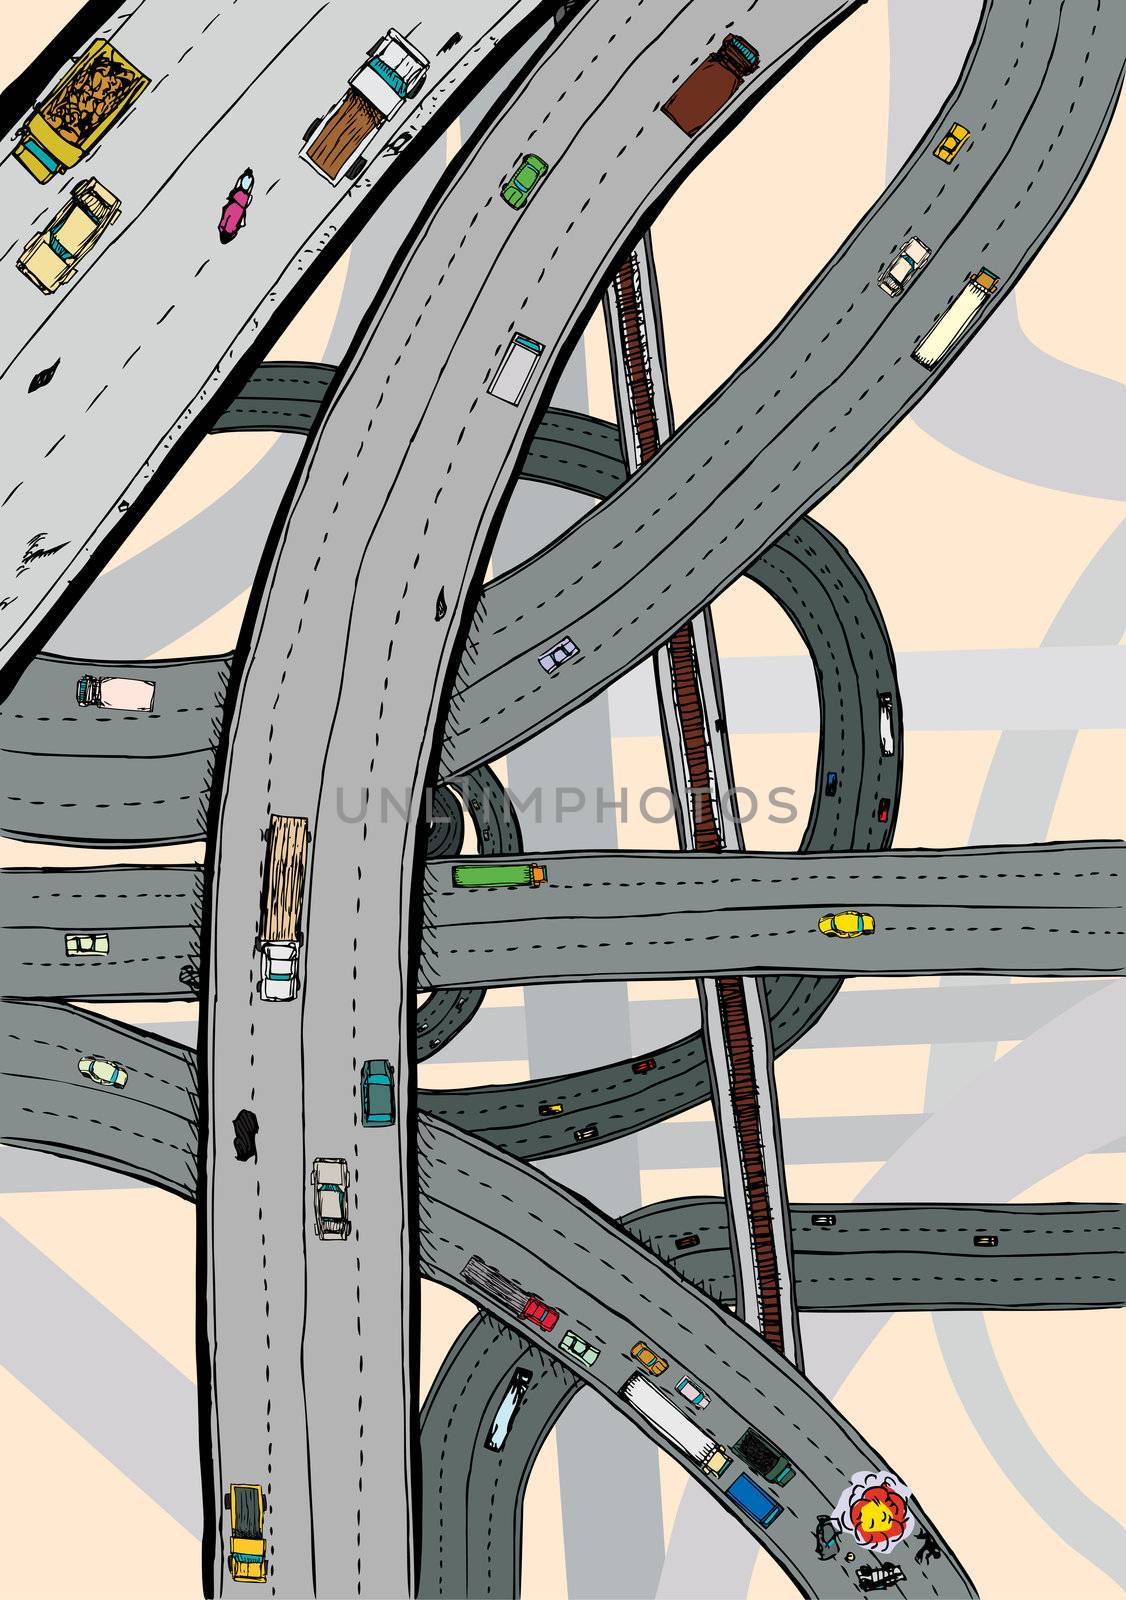 Highways and junctions with cars, trucks and railroad tracks